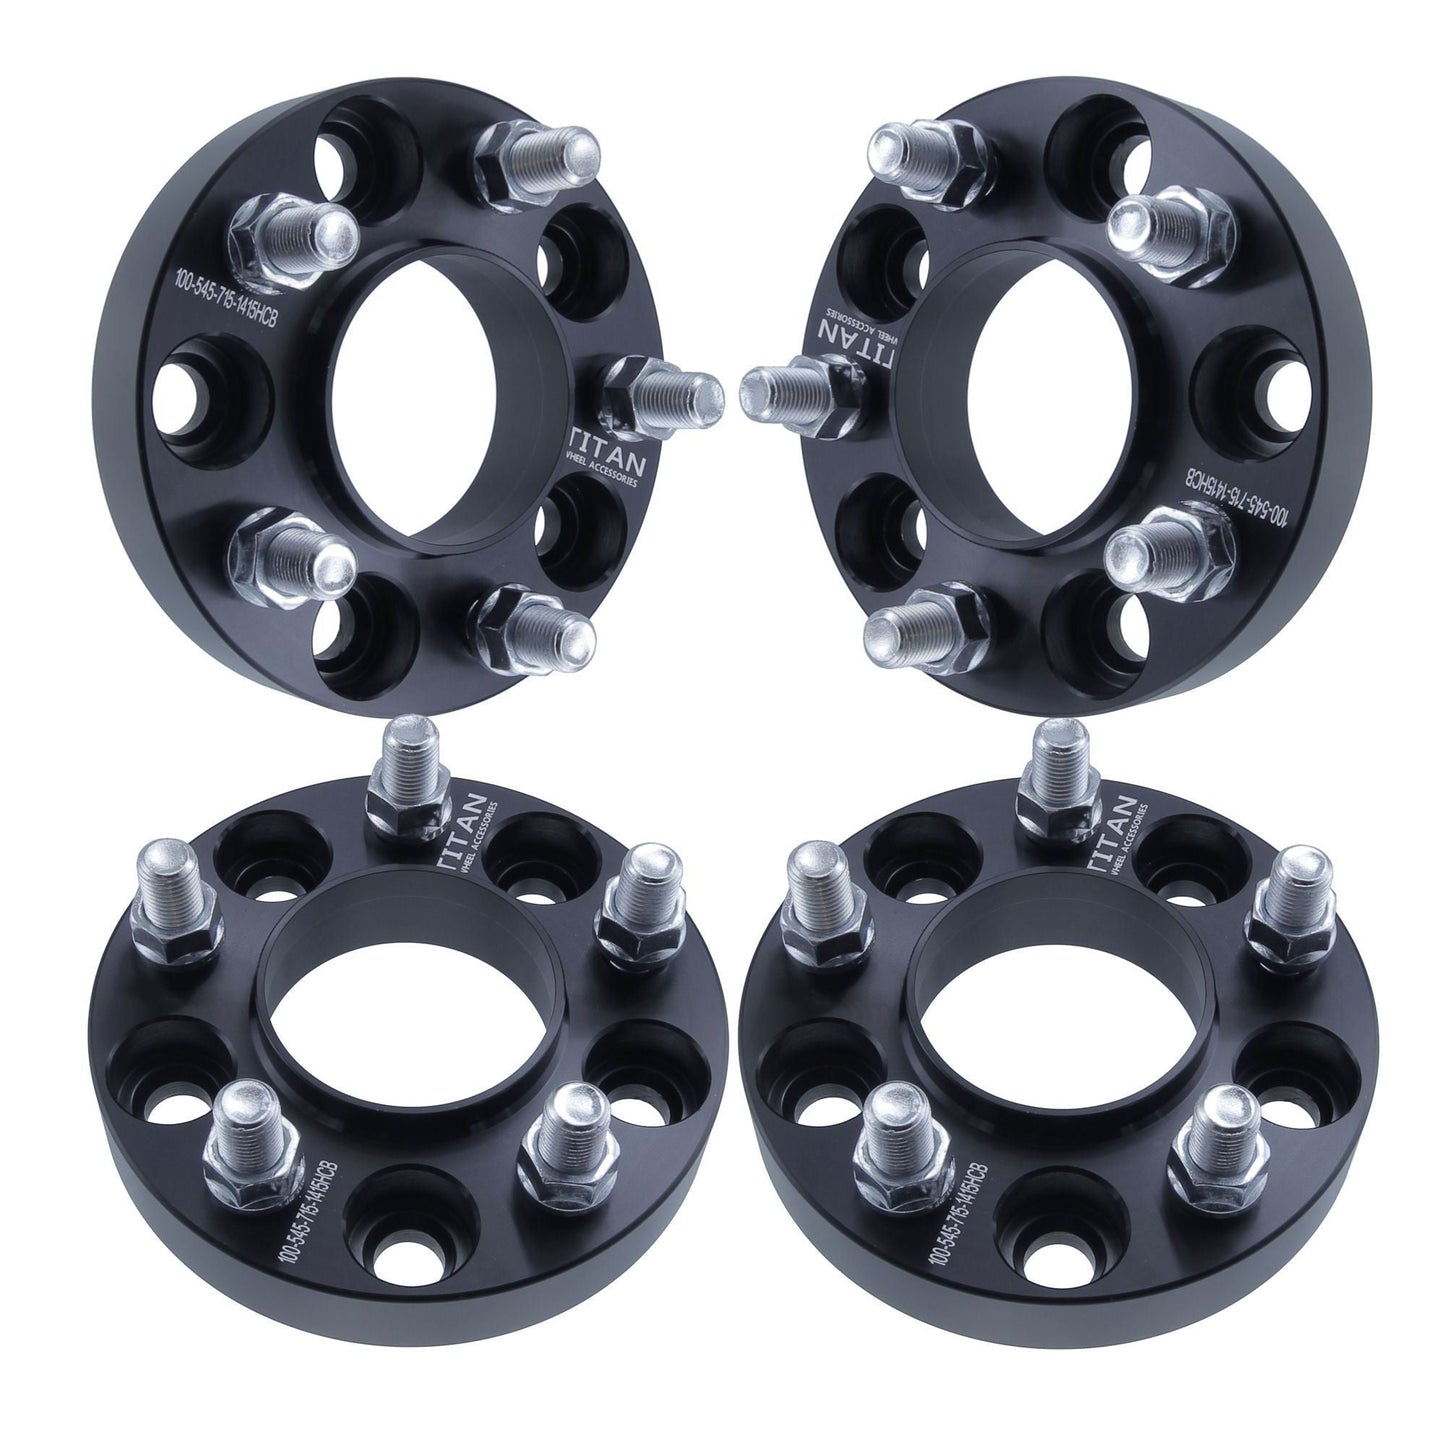 1" (25mm) Titan Wheel Spacers for Chrysler 300 Dodge Challenger Charger | 5x4.5 | 71.5 Hubcentric |14x1.5 Studs |  Set of 4 | Titan Wheel Accessories